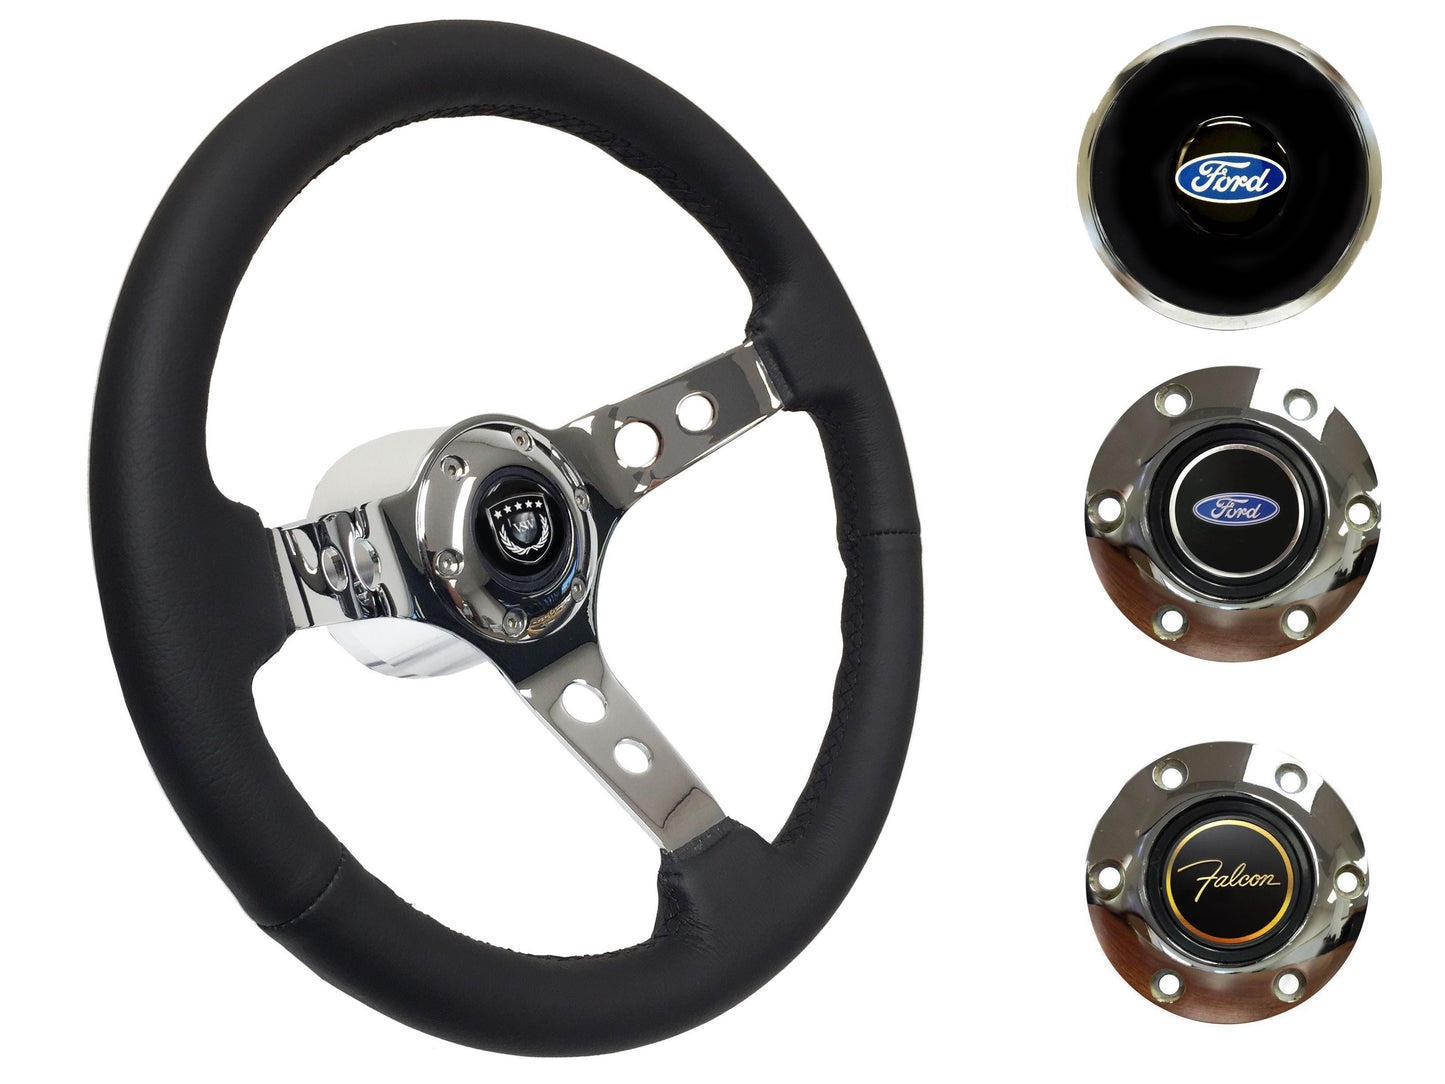 1970 Ford Falcon Steering Wheel Kit | Black Leather | ST3095